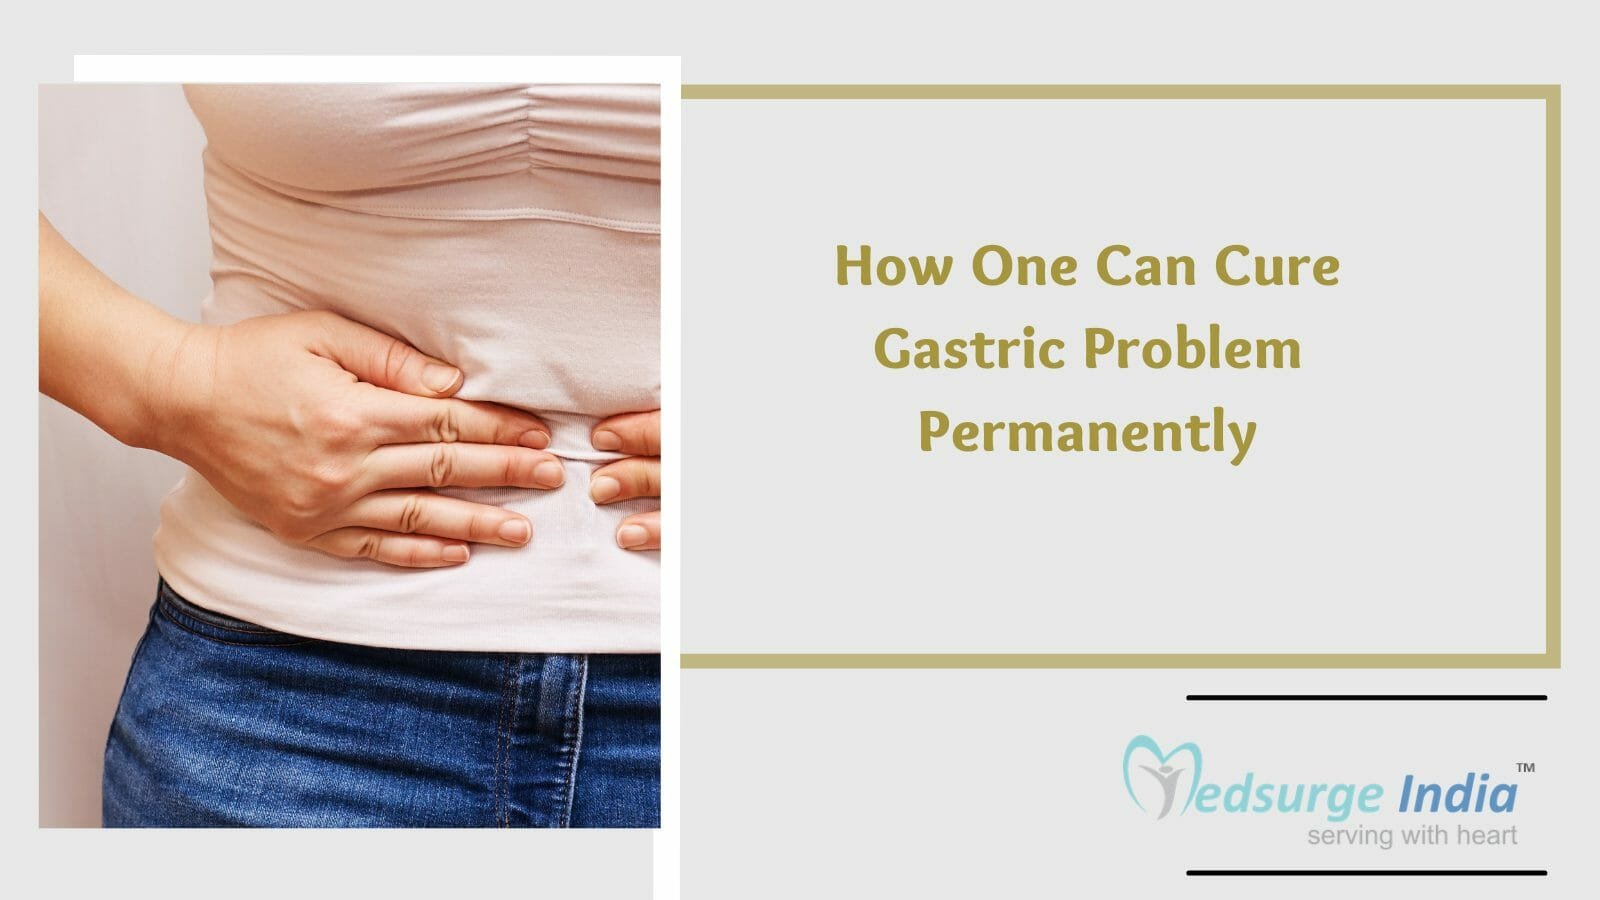 How One Can Cure Gastric Problem Permanently